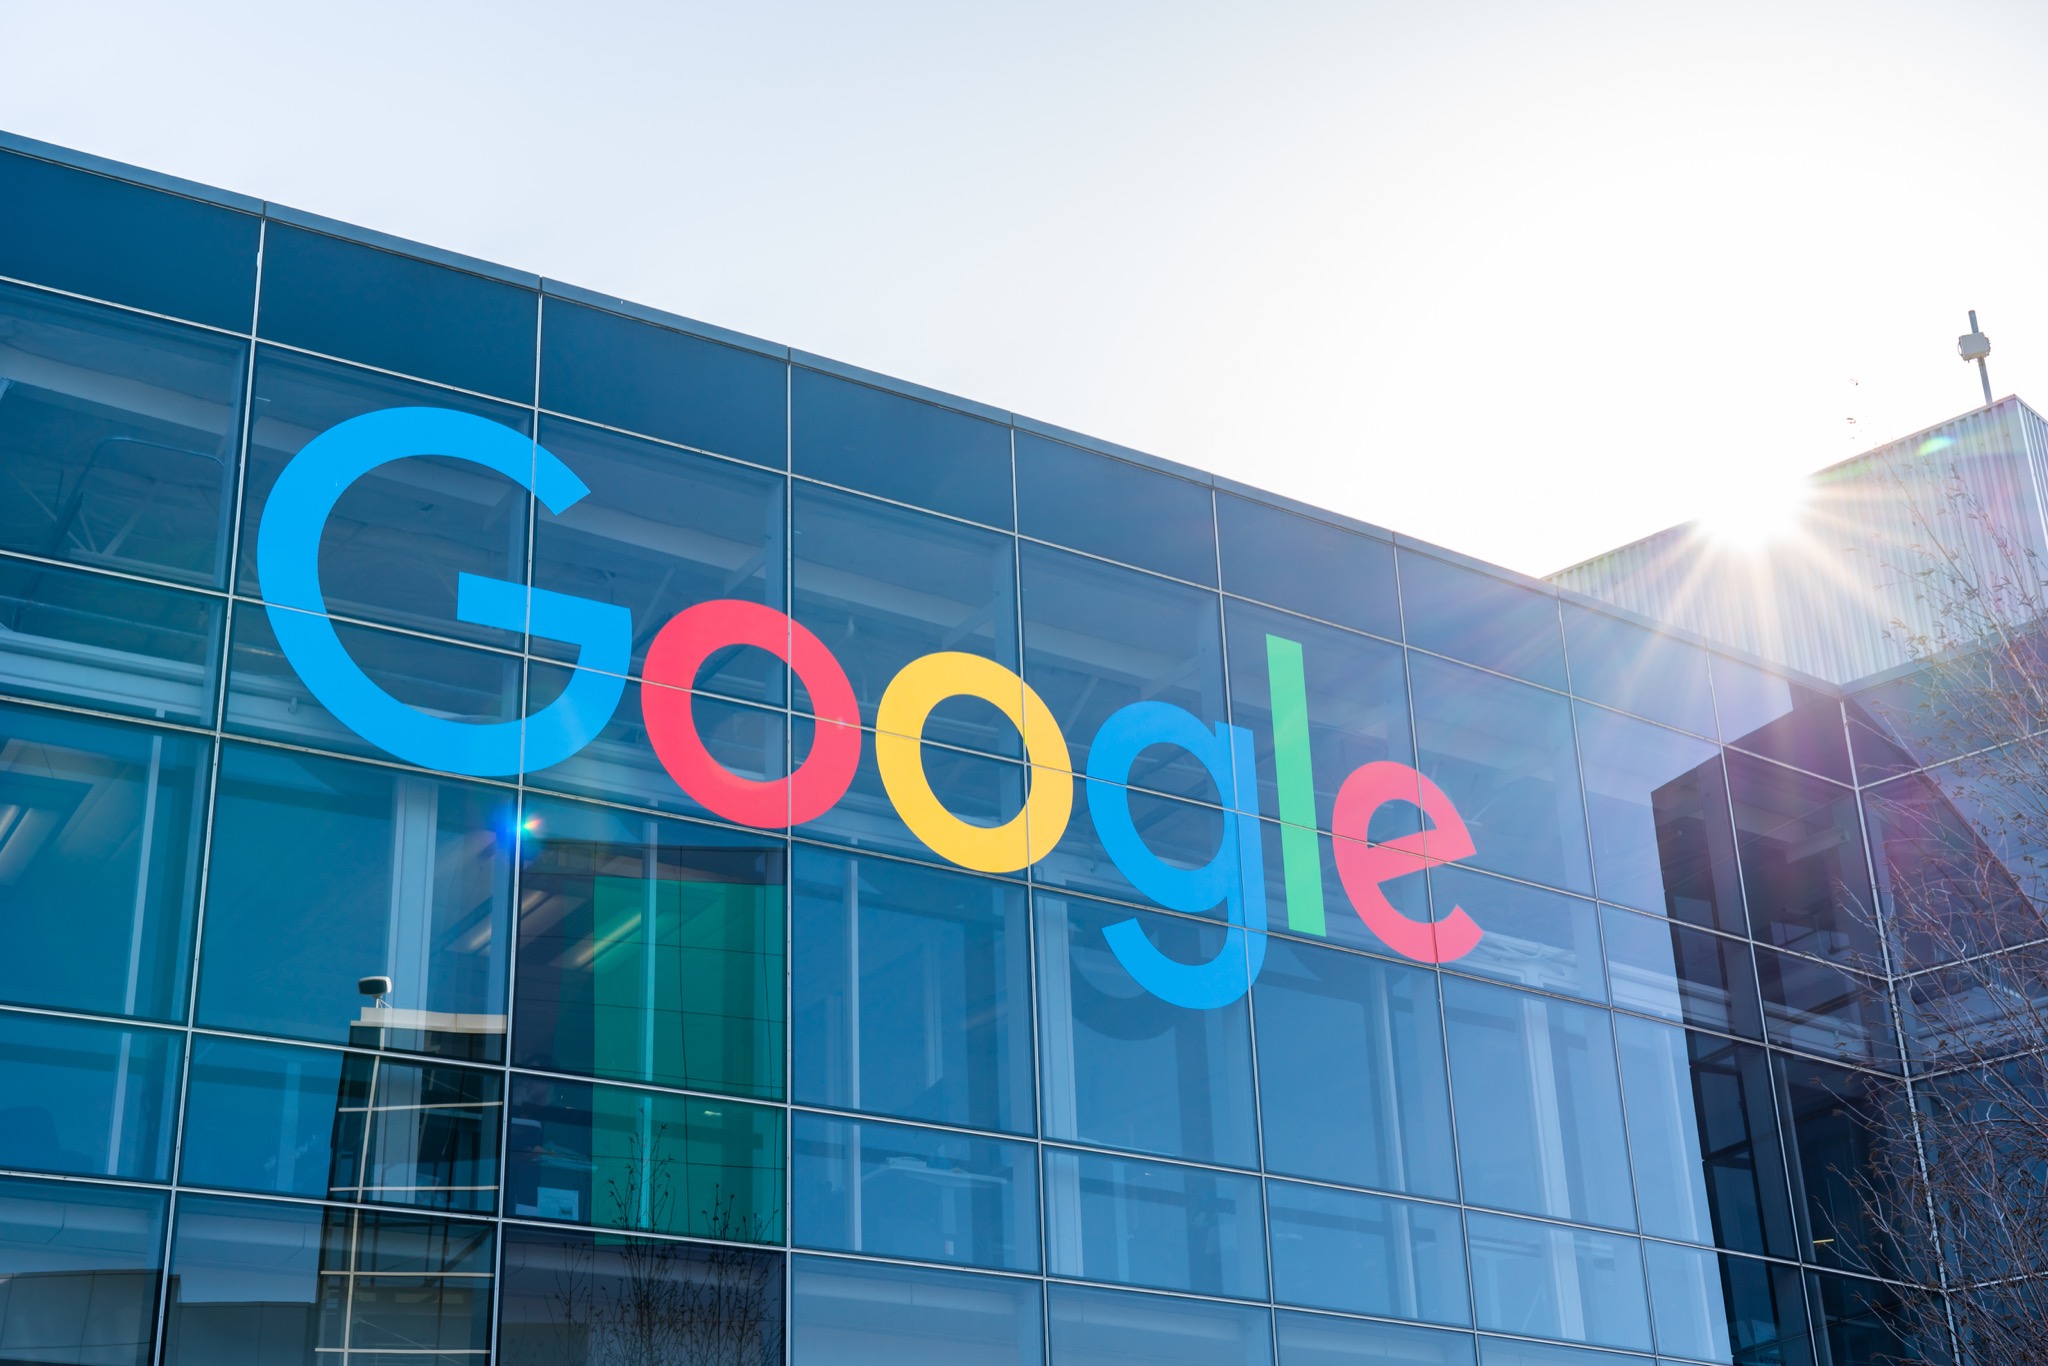 Google paying $500M to shed office space